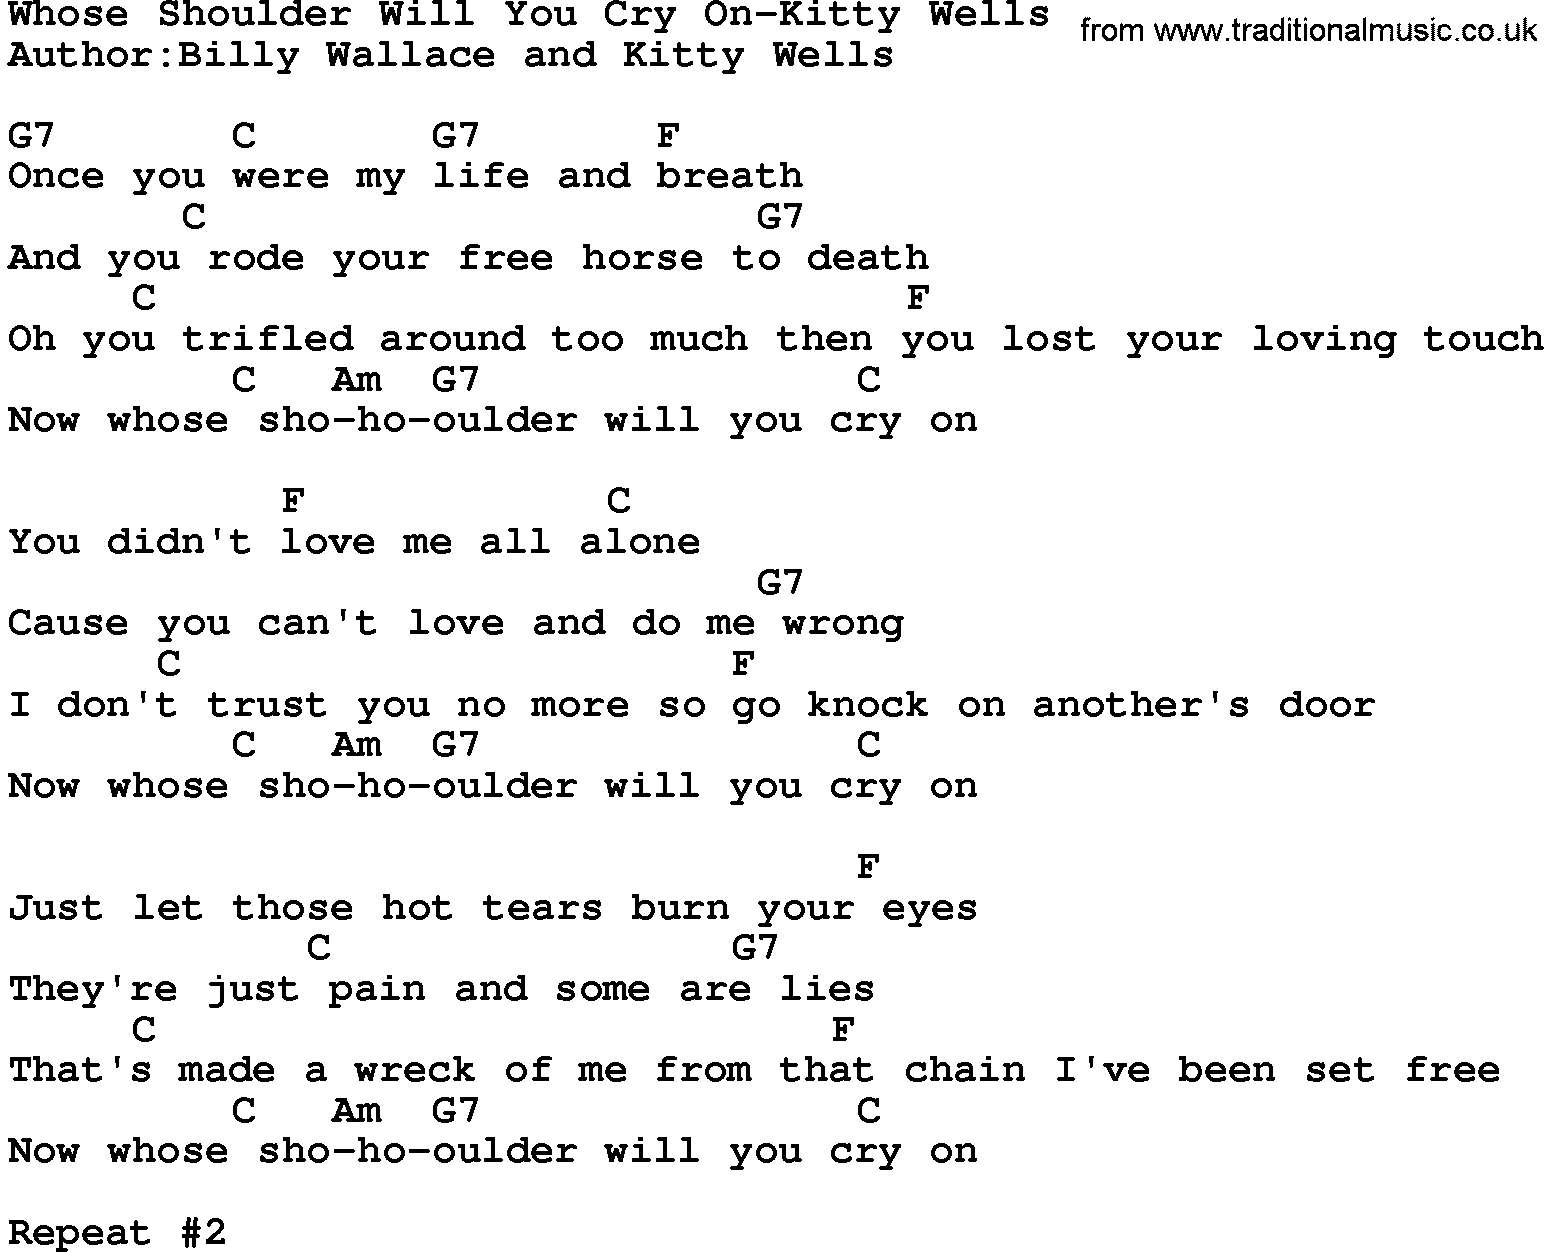 Country music song: Whose Shoulder Will You Cry On-Kitty Wells lyrics and chords